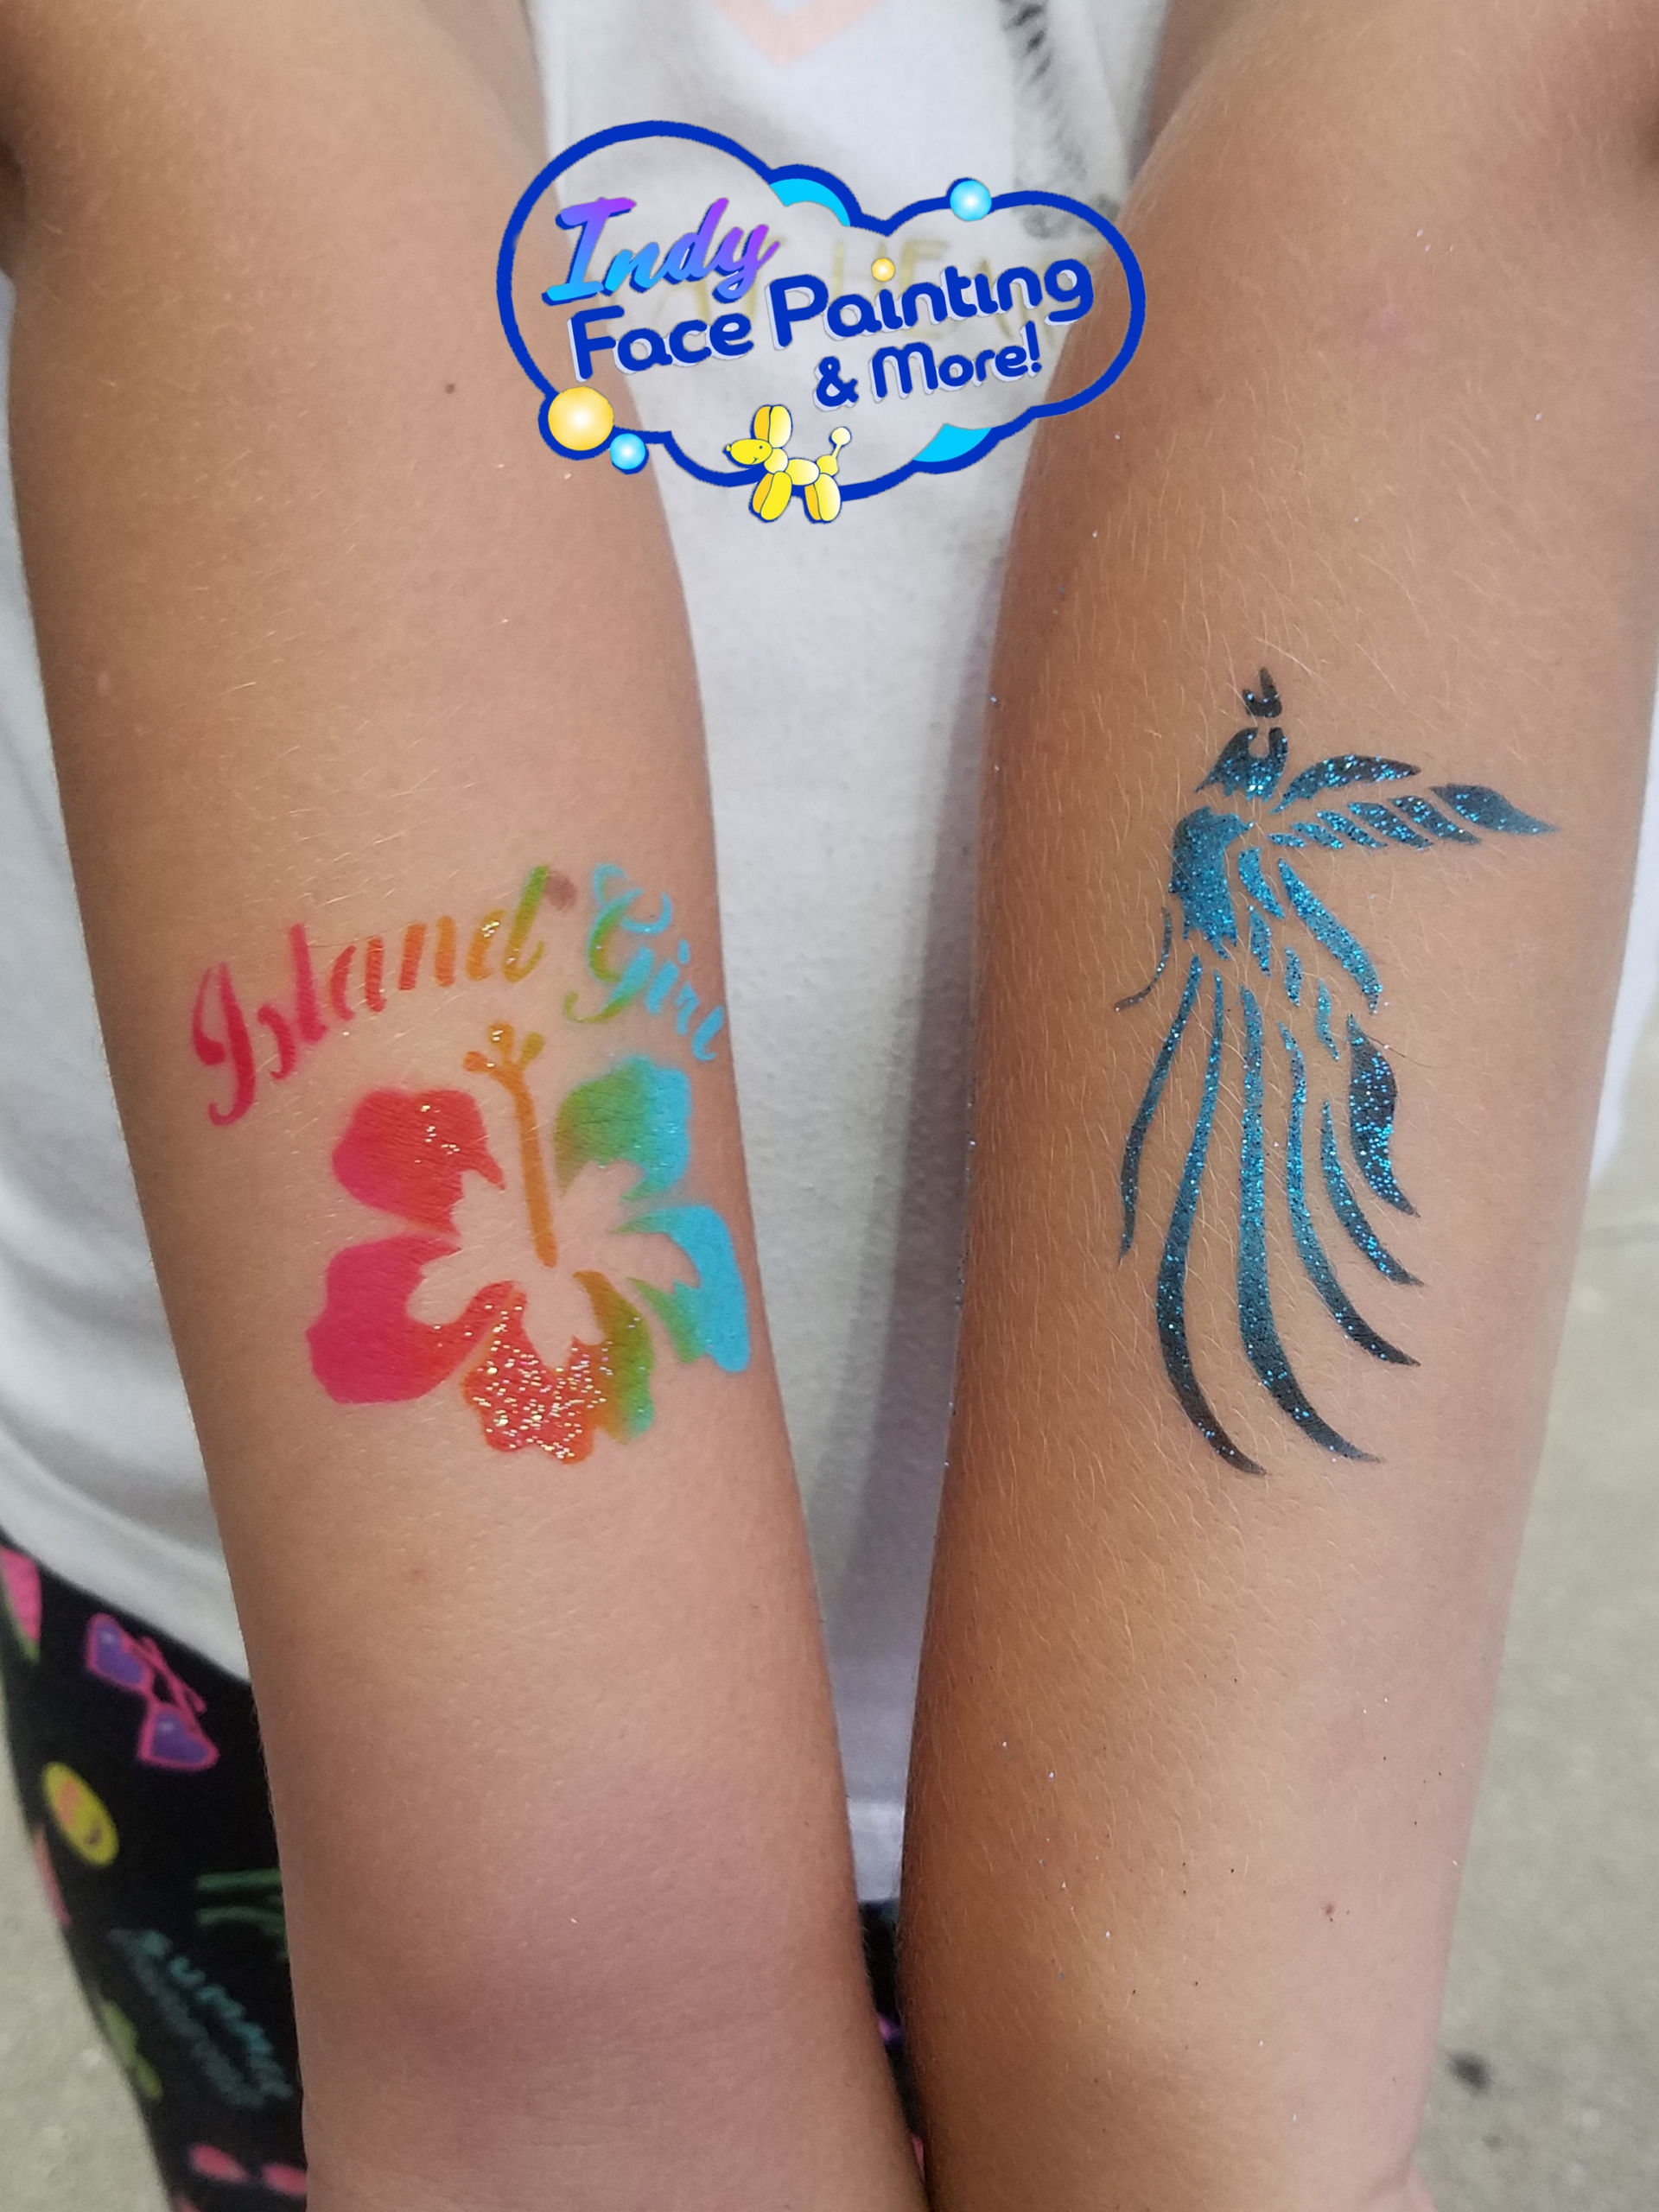 Indy Face Painting Airbrush Tattoo